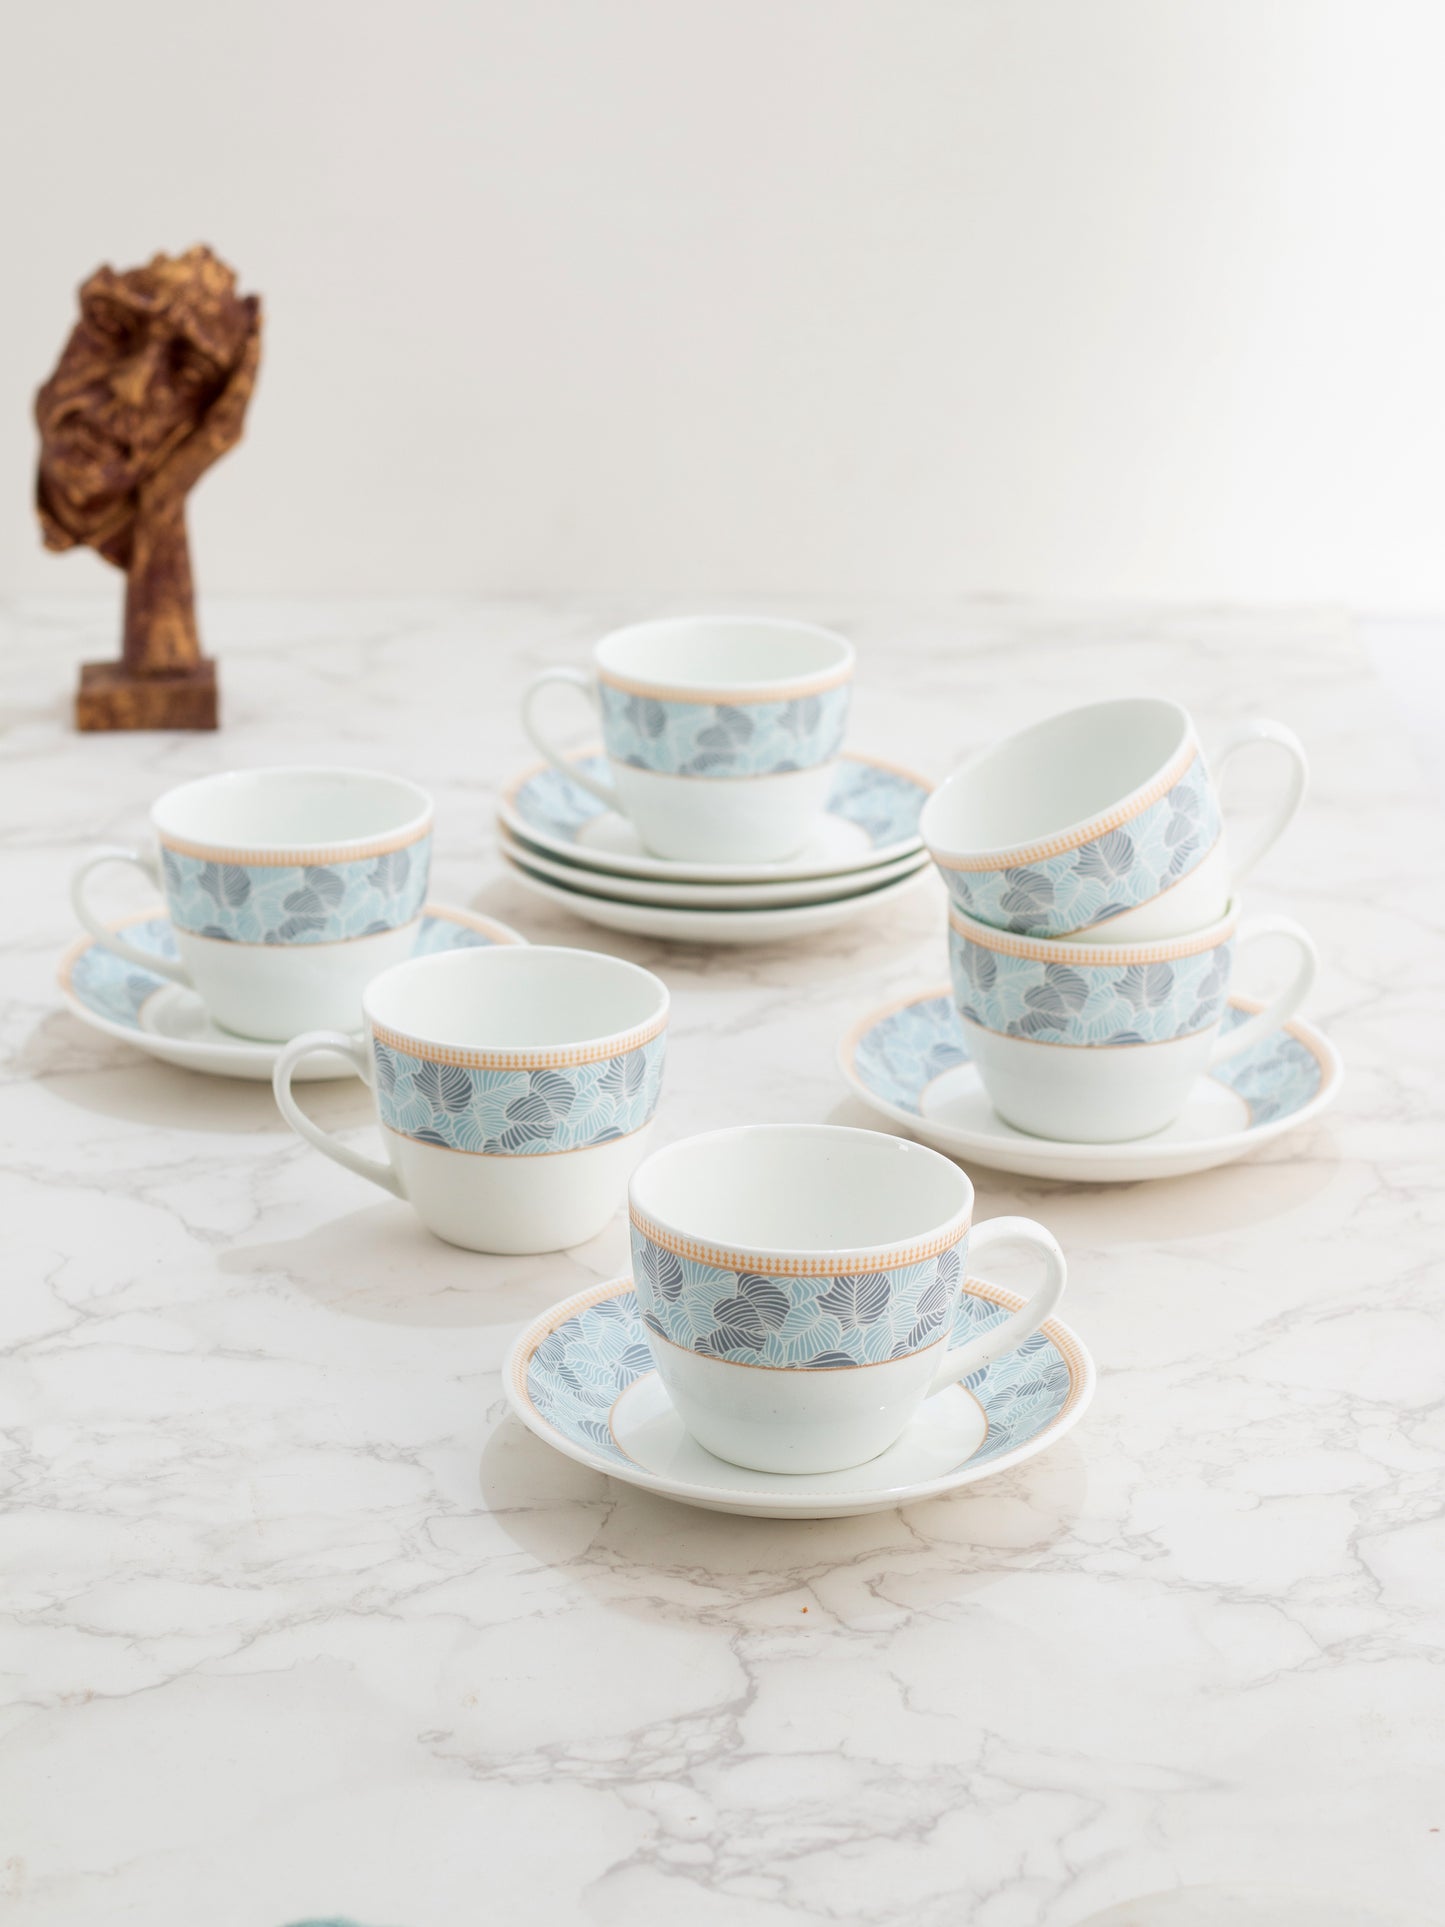 Cream Super Cup & Saucer, 170ml, Set of 12 (6 Cups + 6 Saucers) (S366)